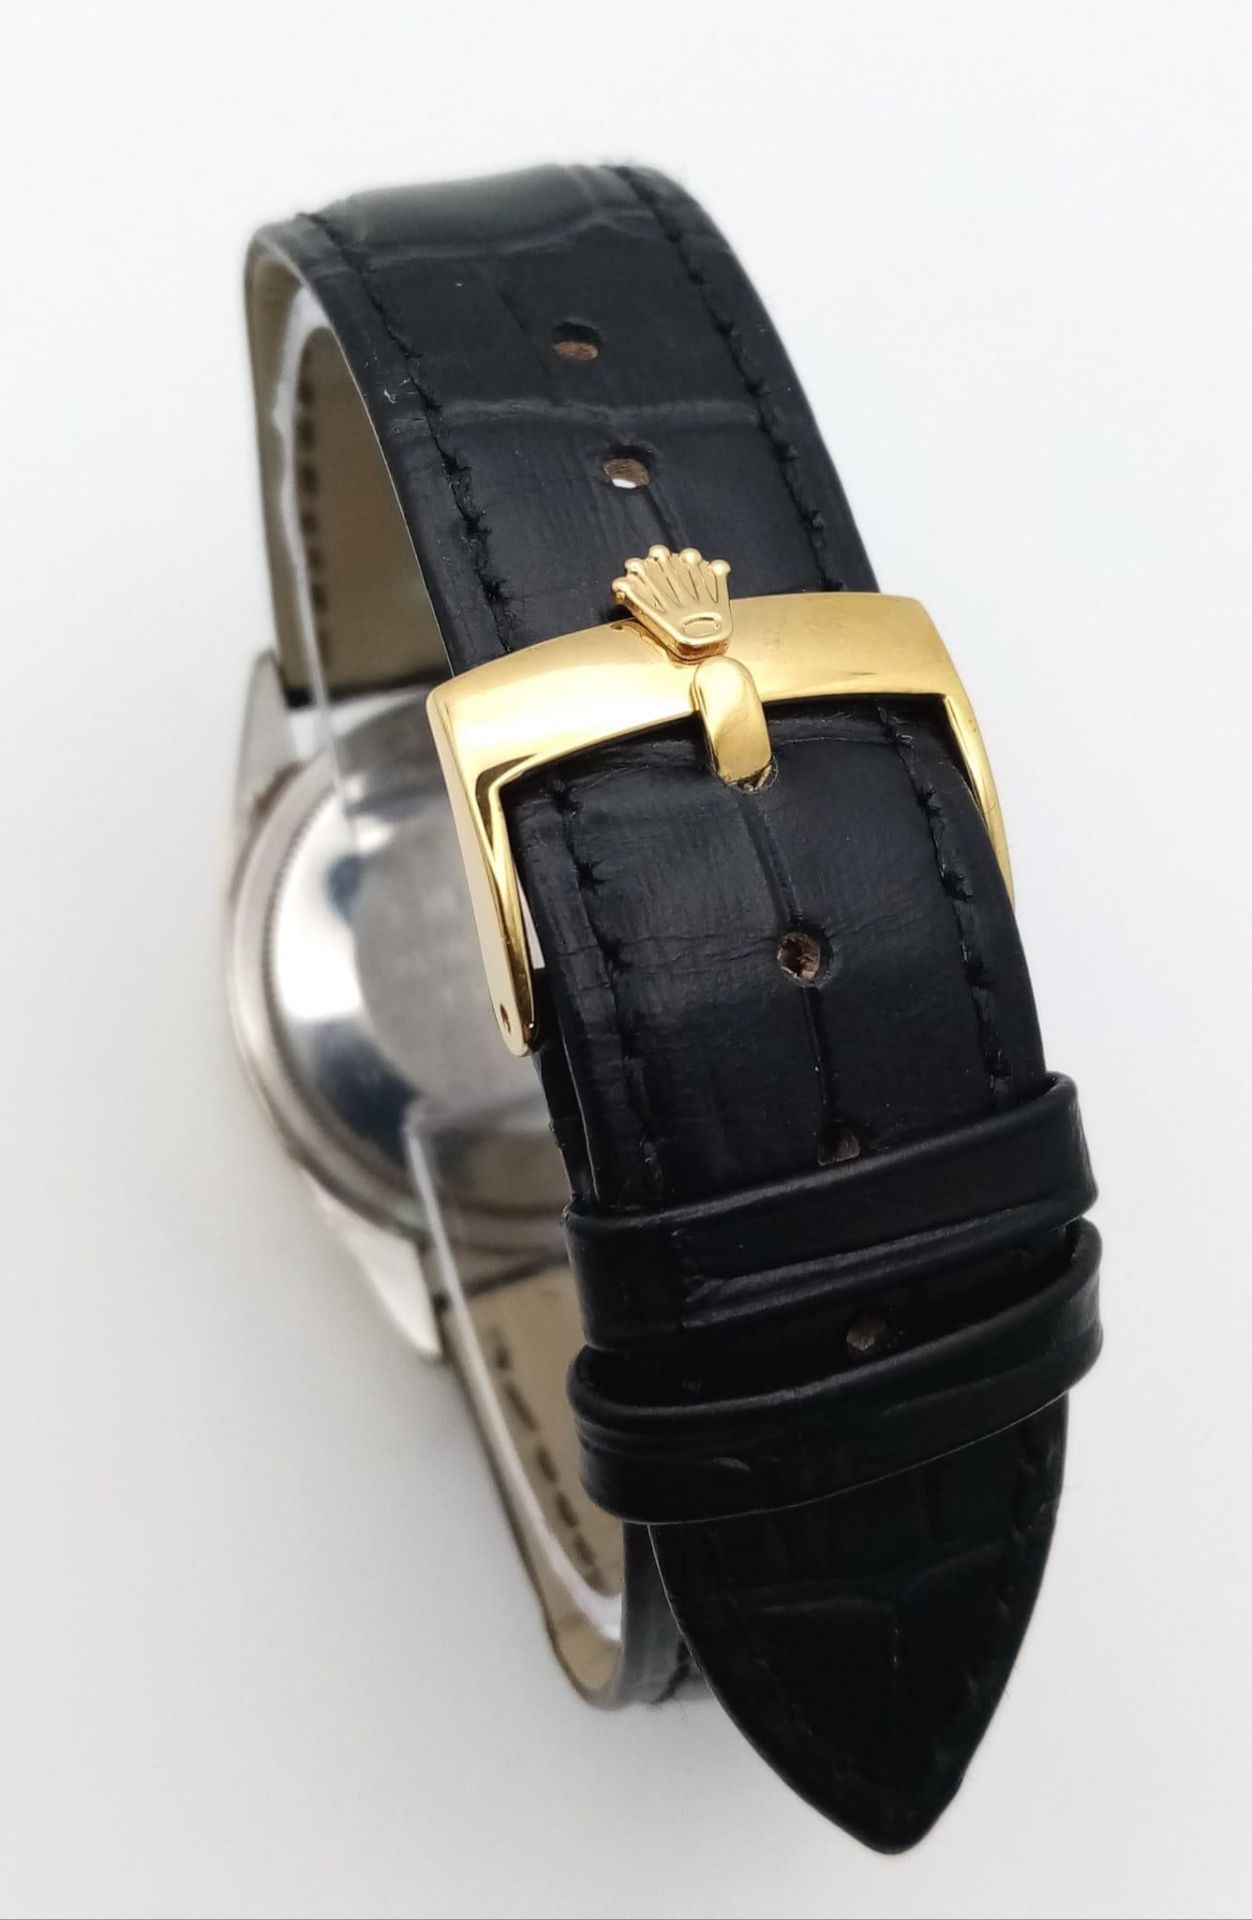 A VINTAGE ROLEX OYSTER PERPETUAL GENTS WATCH ON THE ORIGINAL ROLEX BLACK LEATHER STRAP ONLY WORN A - Image 5 of 9